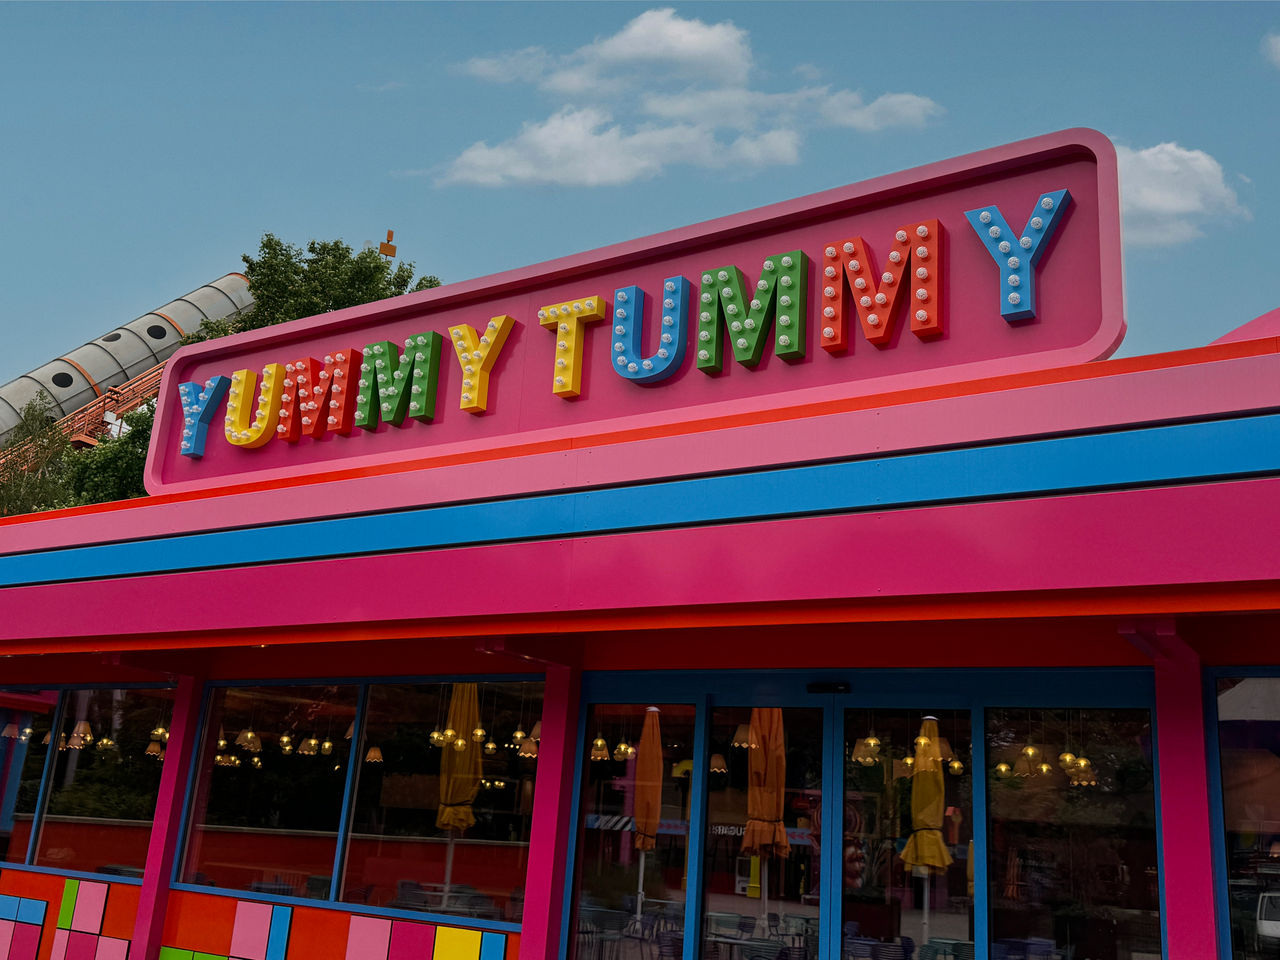 Yummy Tummy - Be surprised by worldly flavors - Walibi Holland